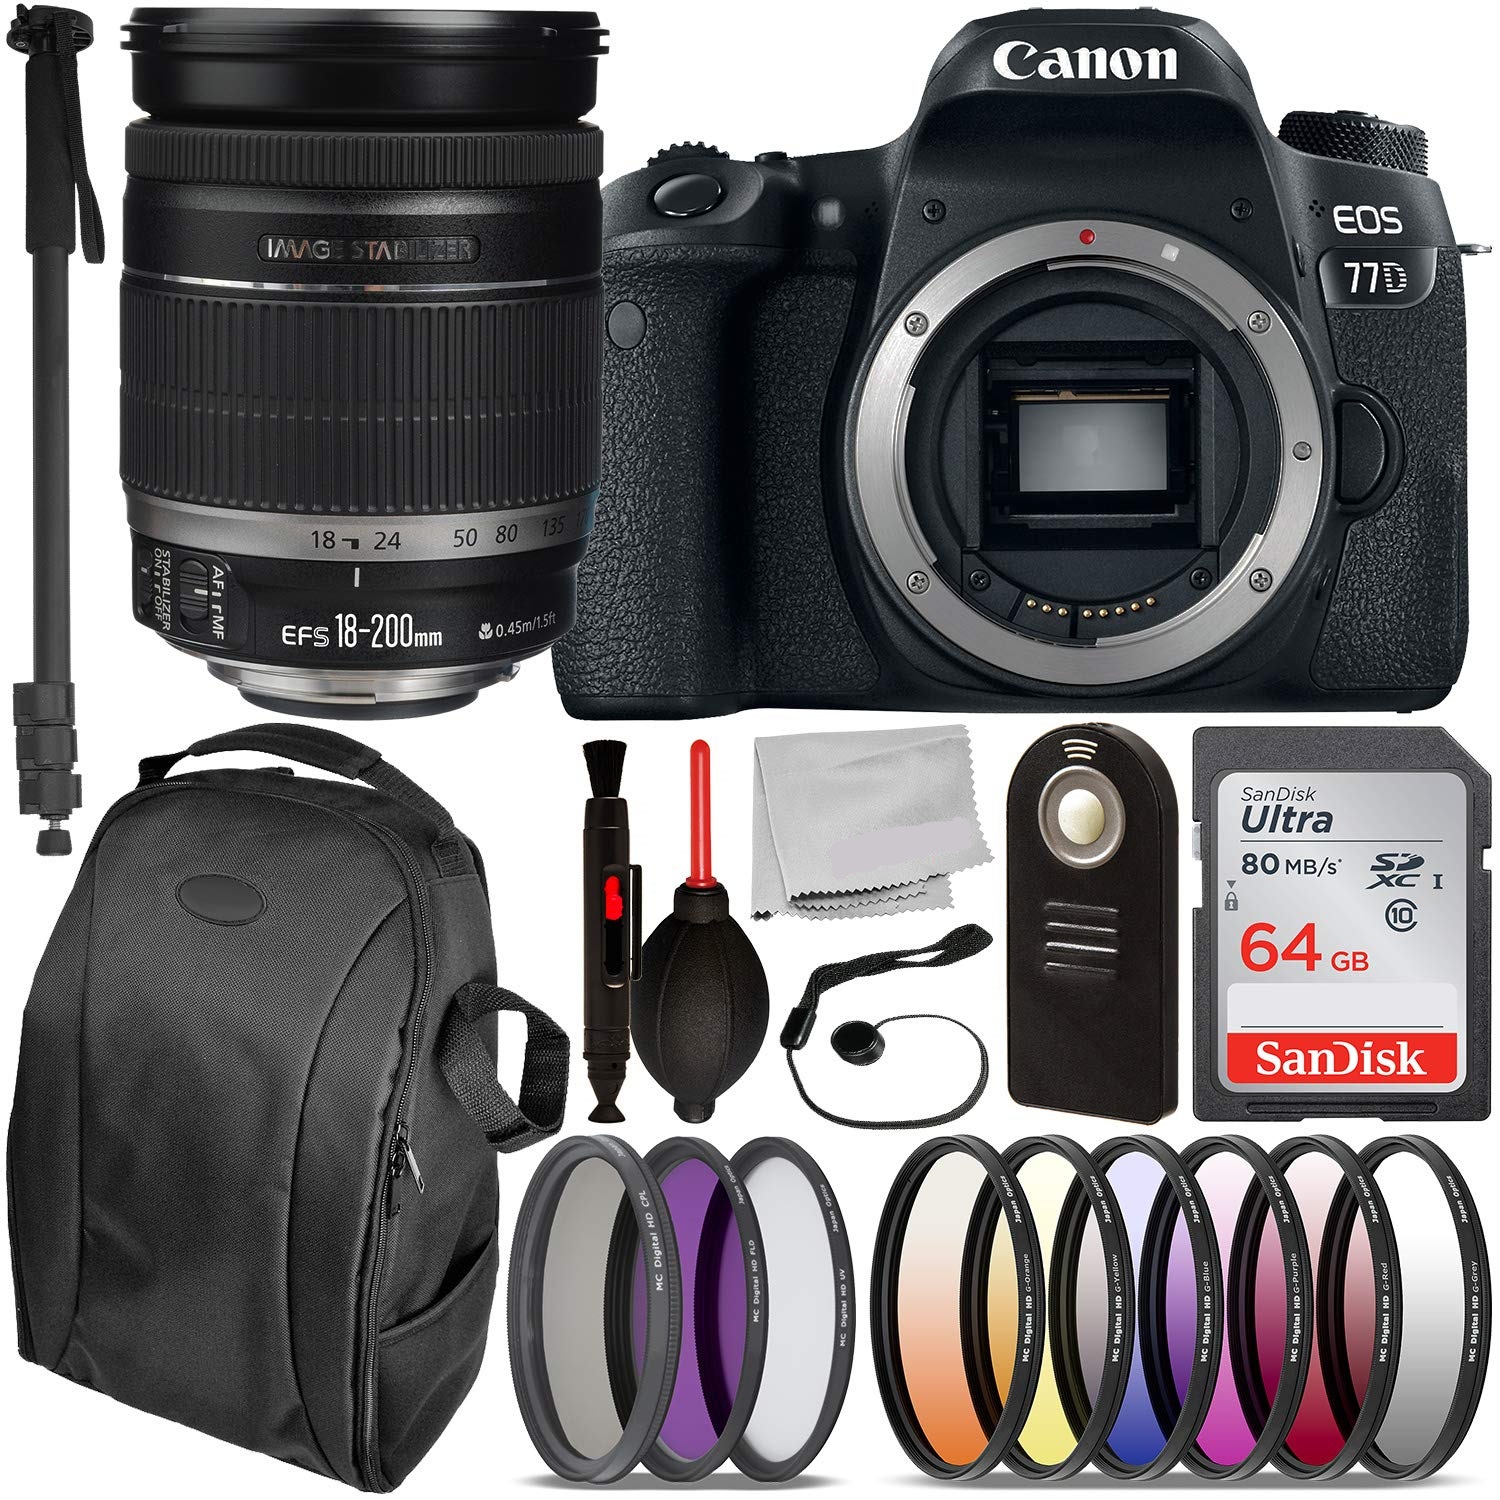 Canon EOS 77D DSLR Camera - 1892C001 with EF-S 18-200mm f/3.5-5.6 IS Lens - 2752B002 and Essential Accessory Bundle